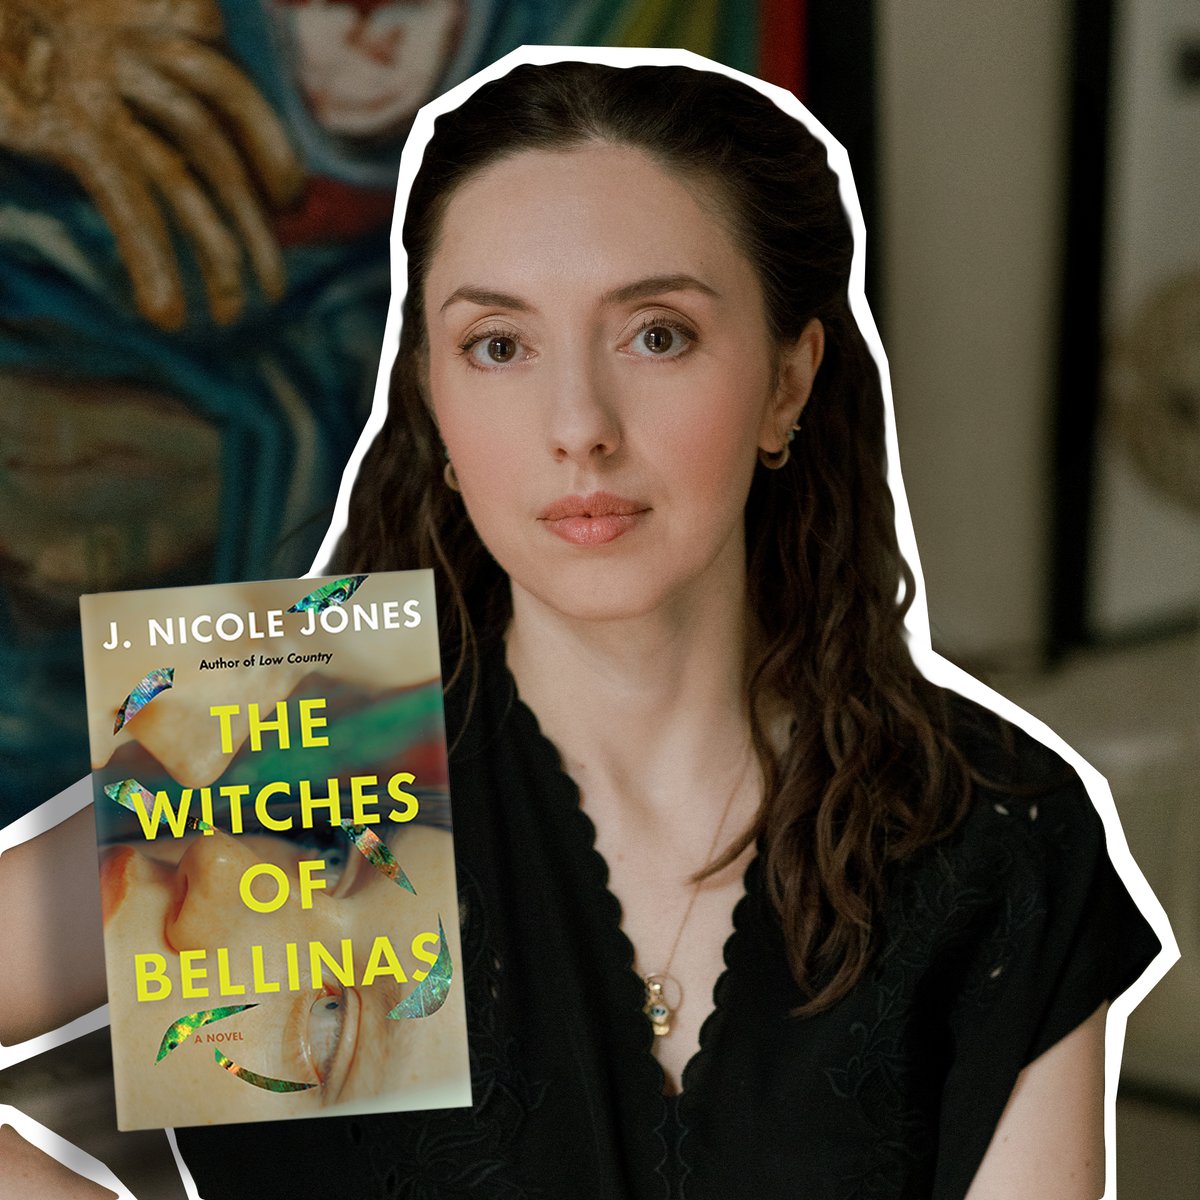 Happiest of pub days to @jnicolejones! THE WITCHES OF BELLINAS is on shelves now! ✨ 'Like the eerie technicolor lovechild of Midsommar and Rebecca.' —Clare Beams, author of The Illness Lesson An unforgettable debut novel! books.catapult.co/books/the-witc…